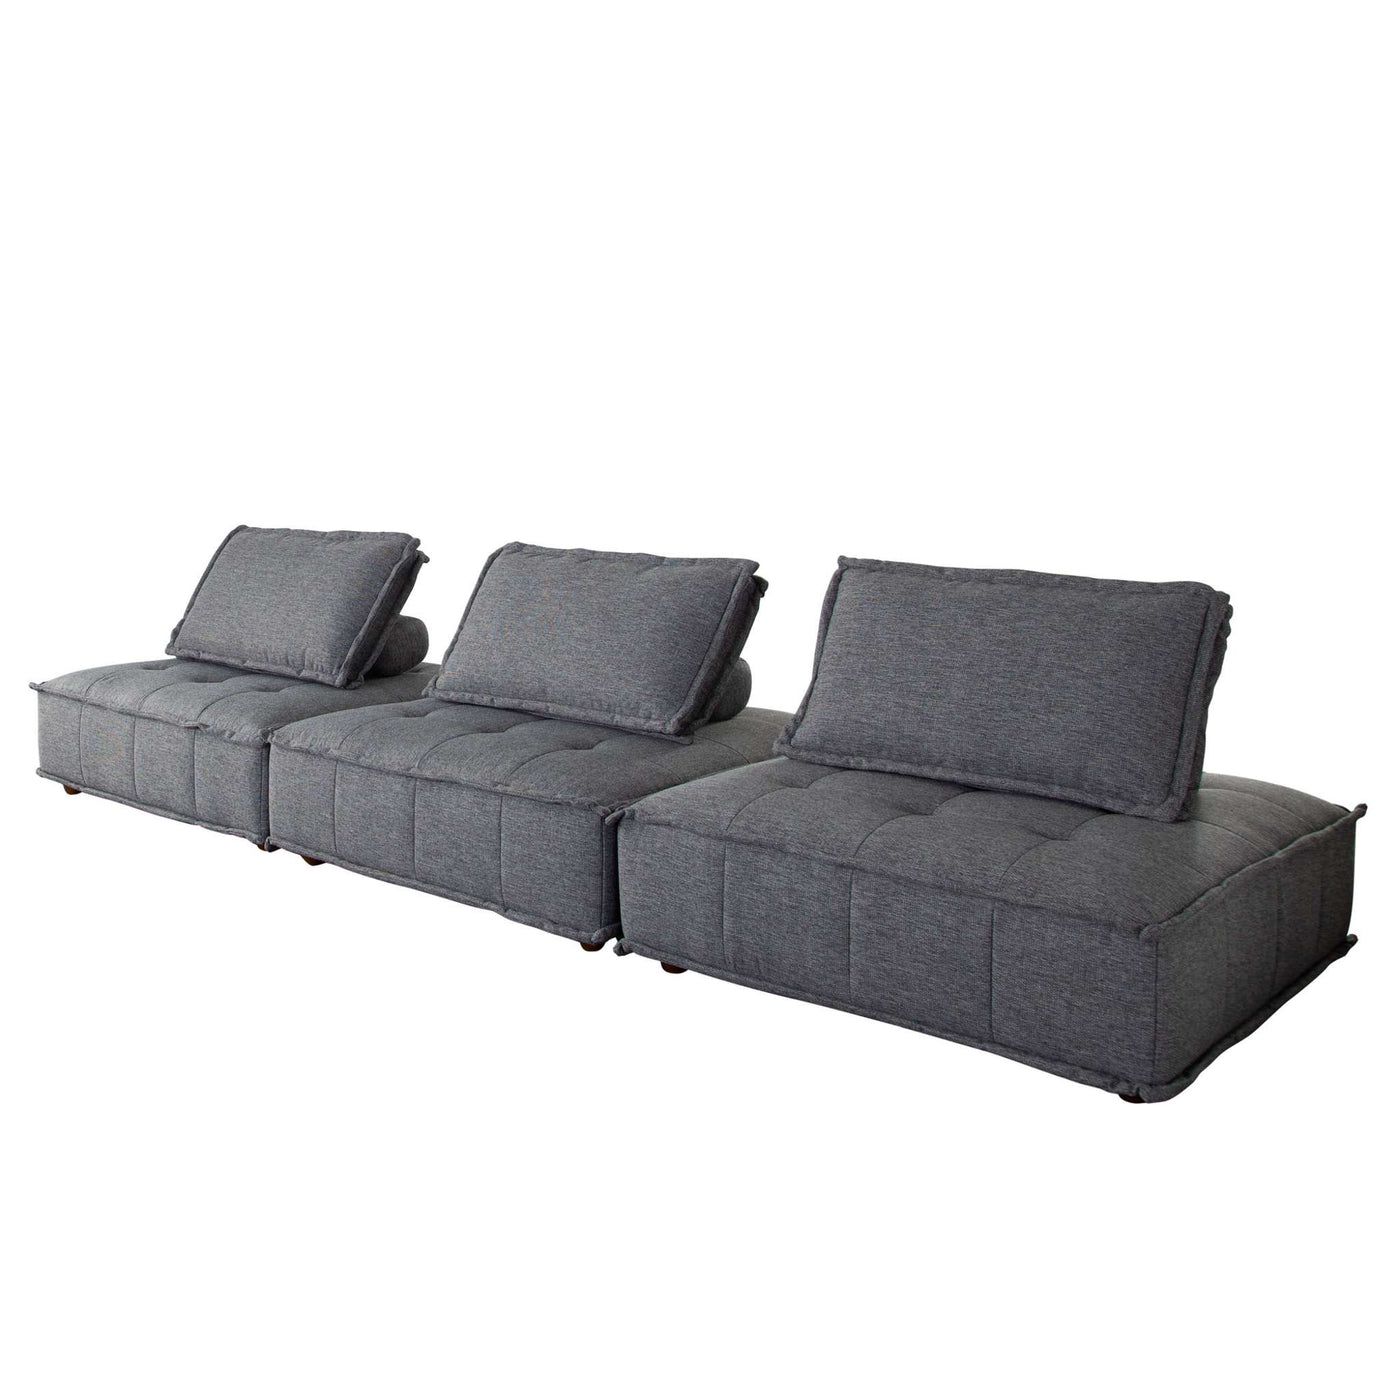 Platform 5-Piece Square Modular Lounger by Diamond Sofa in Light Sand Fabric w/ Bolstered, Non-Skid Backrest